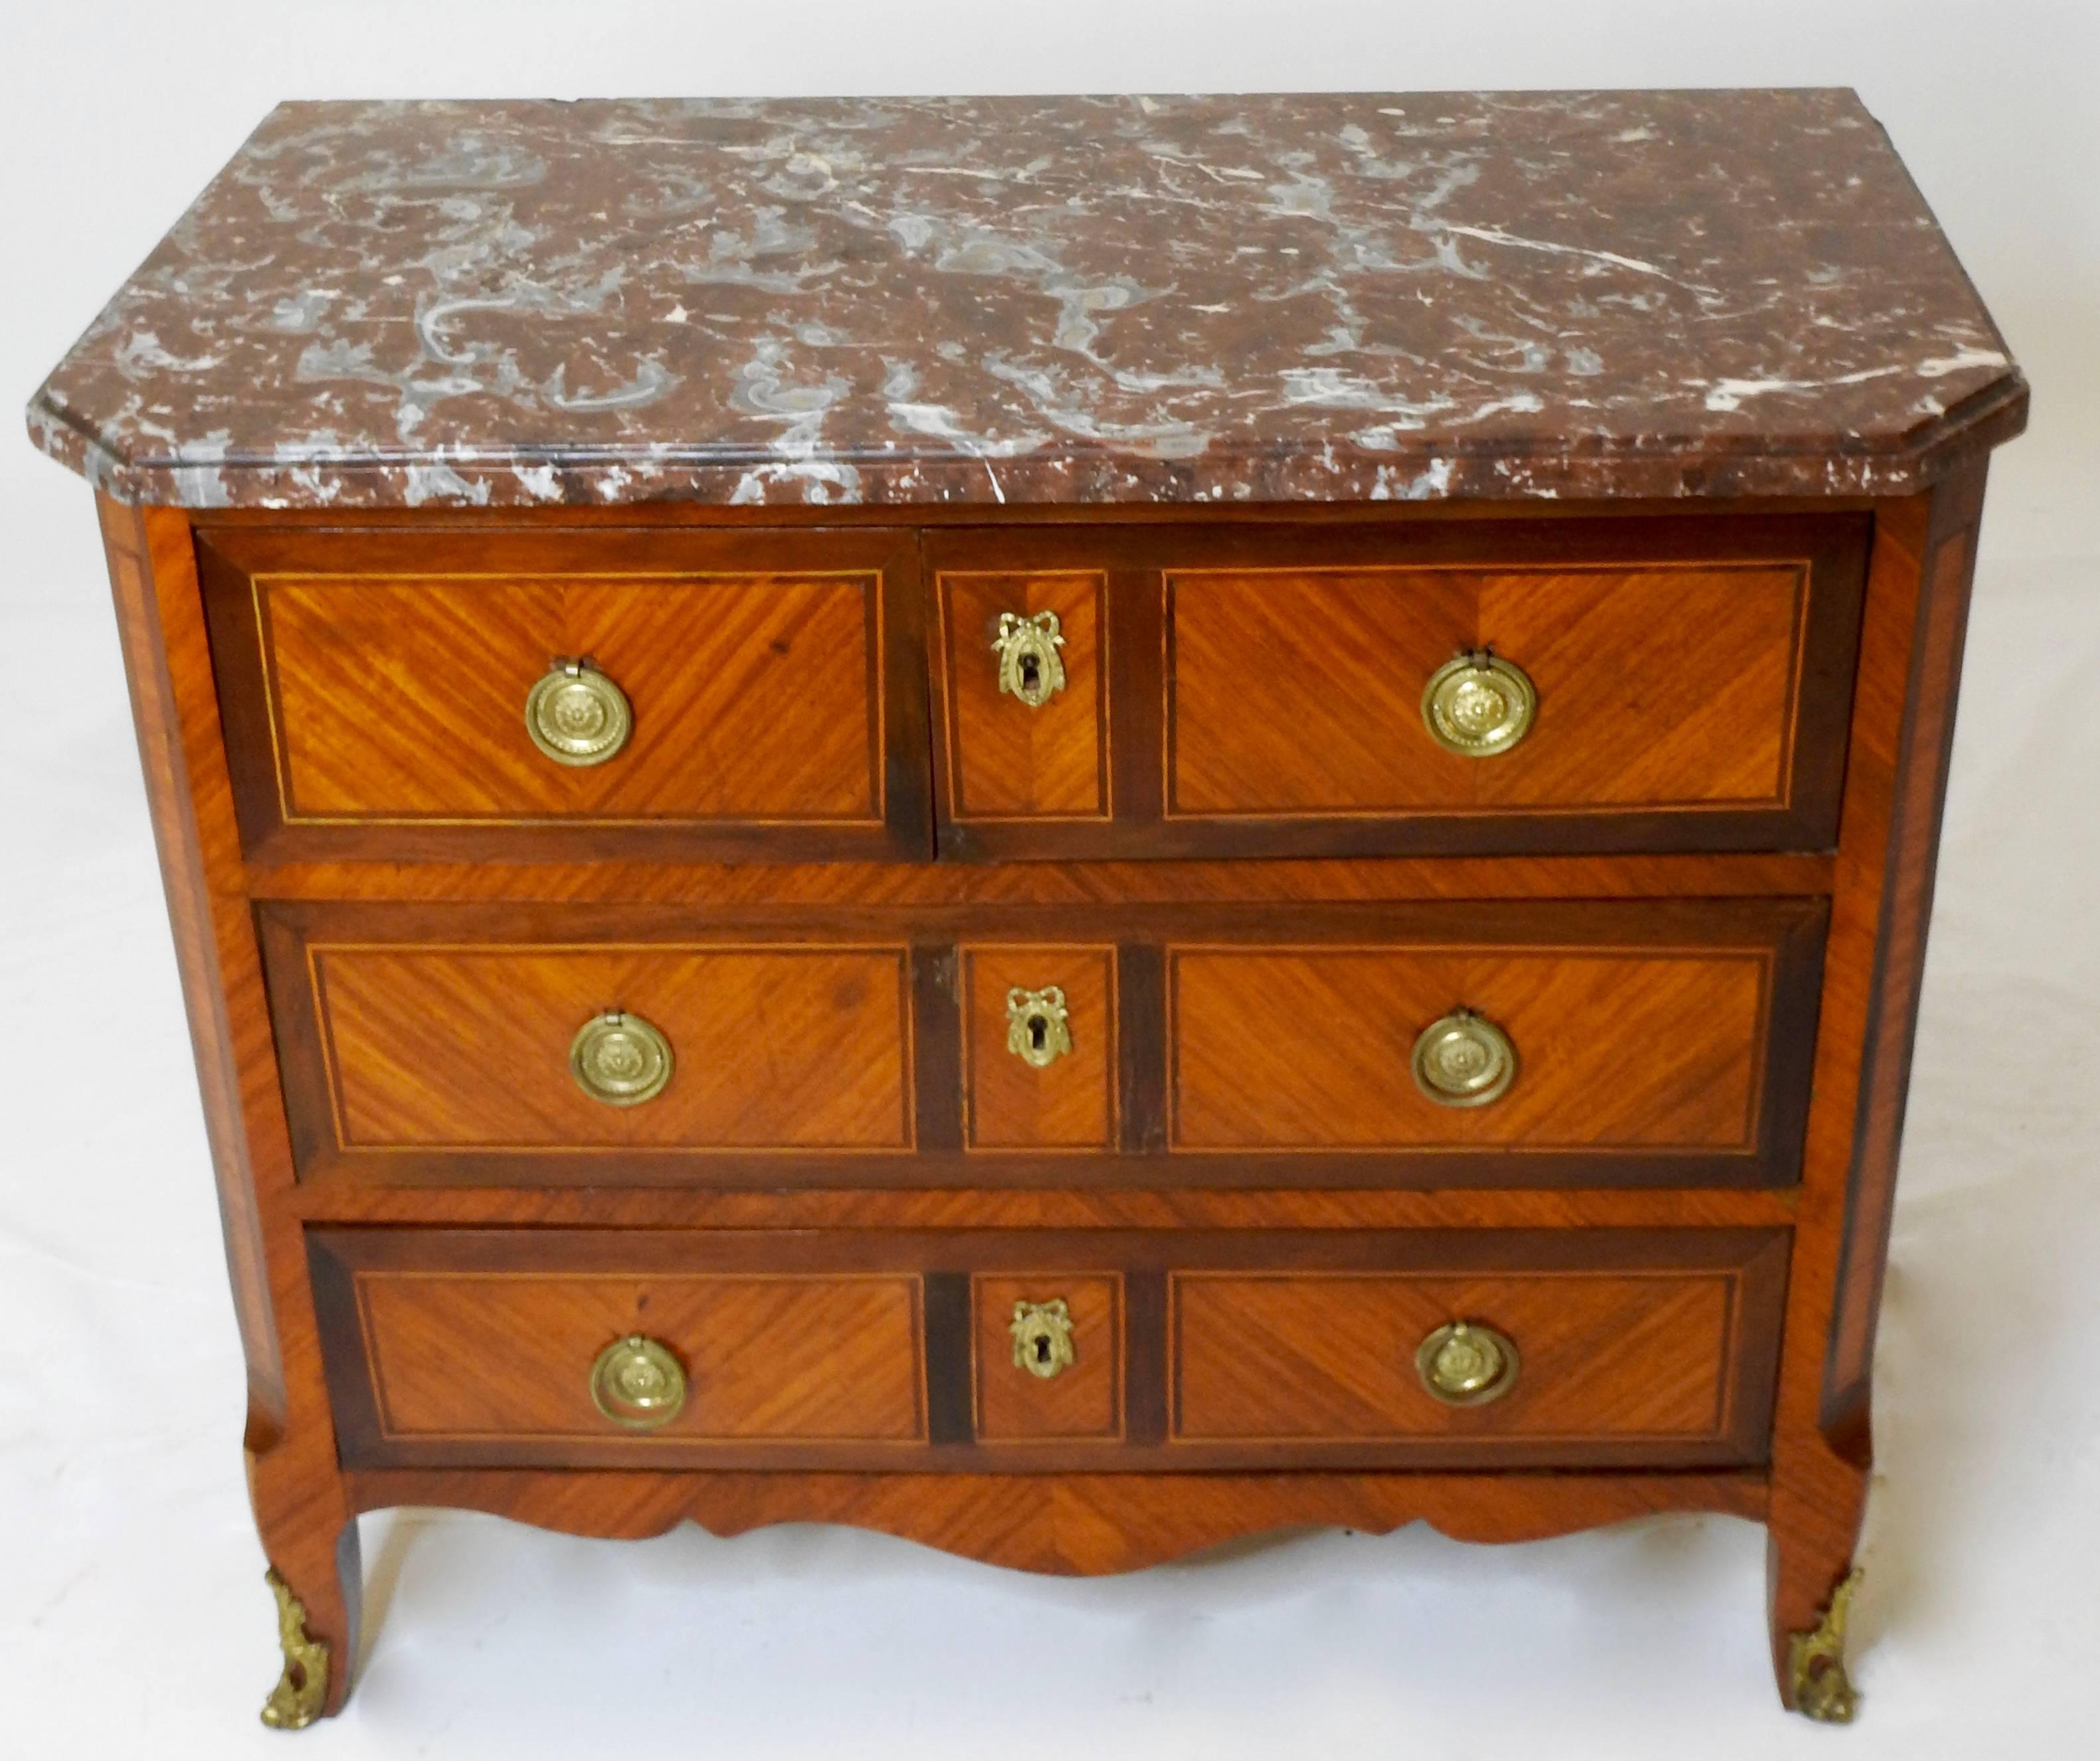 Cabriole legs grace this marble top chest with ormolu detailing. The top section is two drawers and the bottom two sections are singles. The wood inlay details are elegant and geometrical. Ormolu details the front two legs. The pulls are a simple